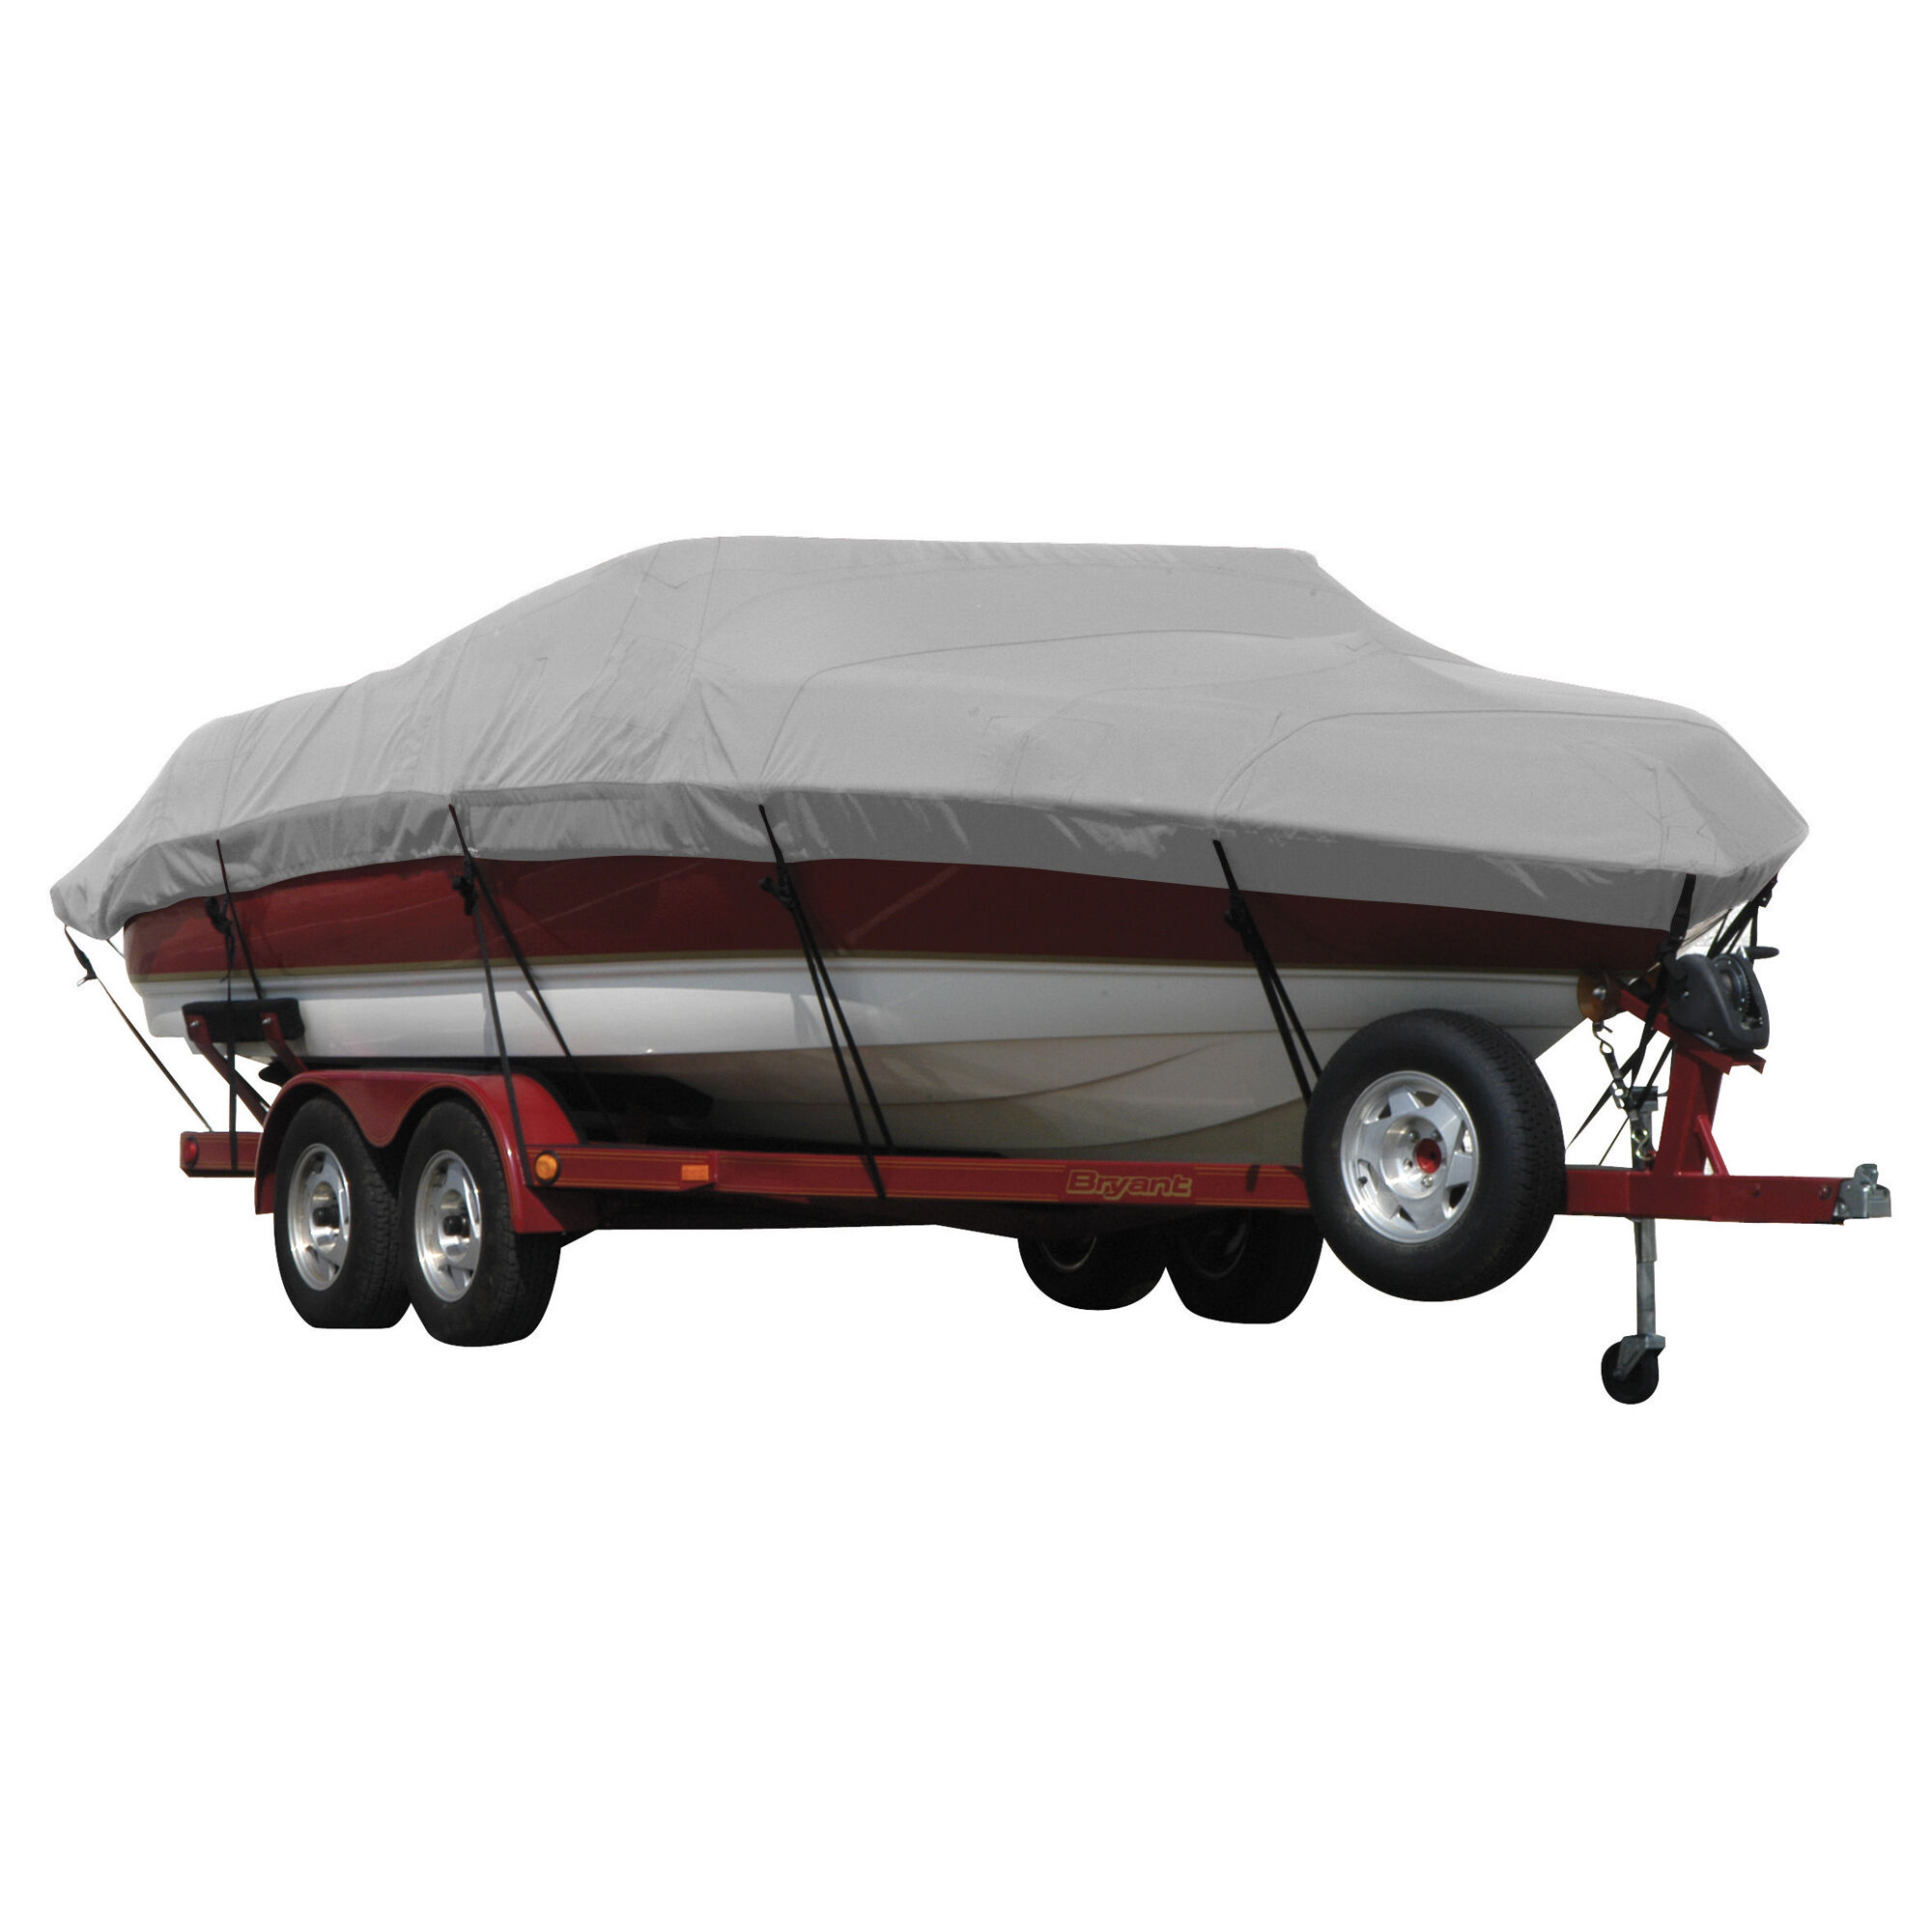 Covermate Exact Fit Sunbrella Boat Cover for Wellcraft Eclipse 215 Eclipse 215 Does Not Accommodate Bow Rails I/O. Grey